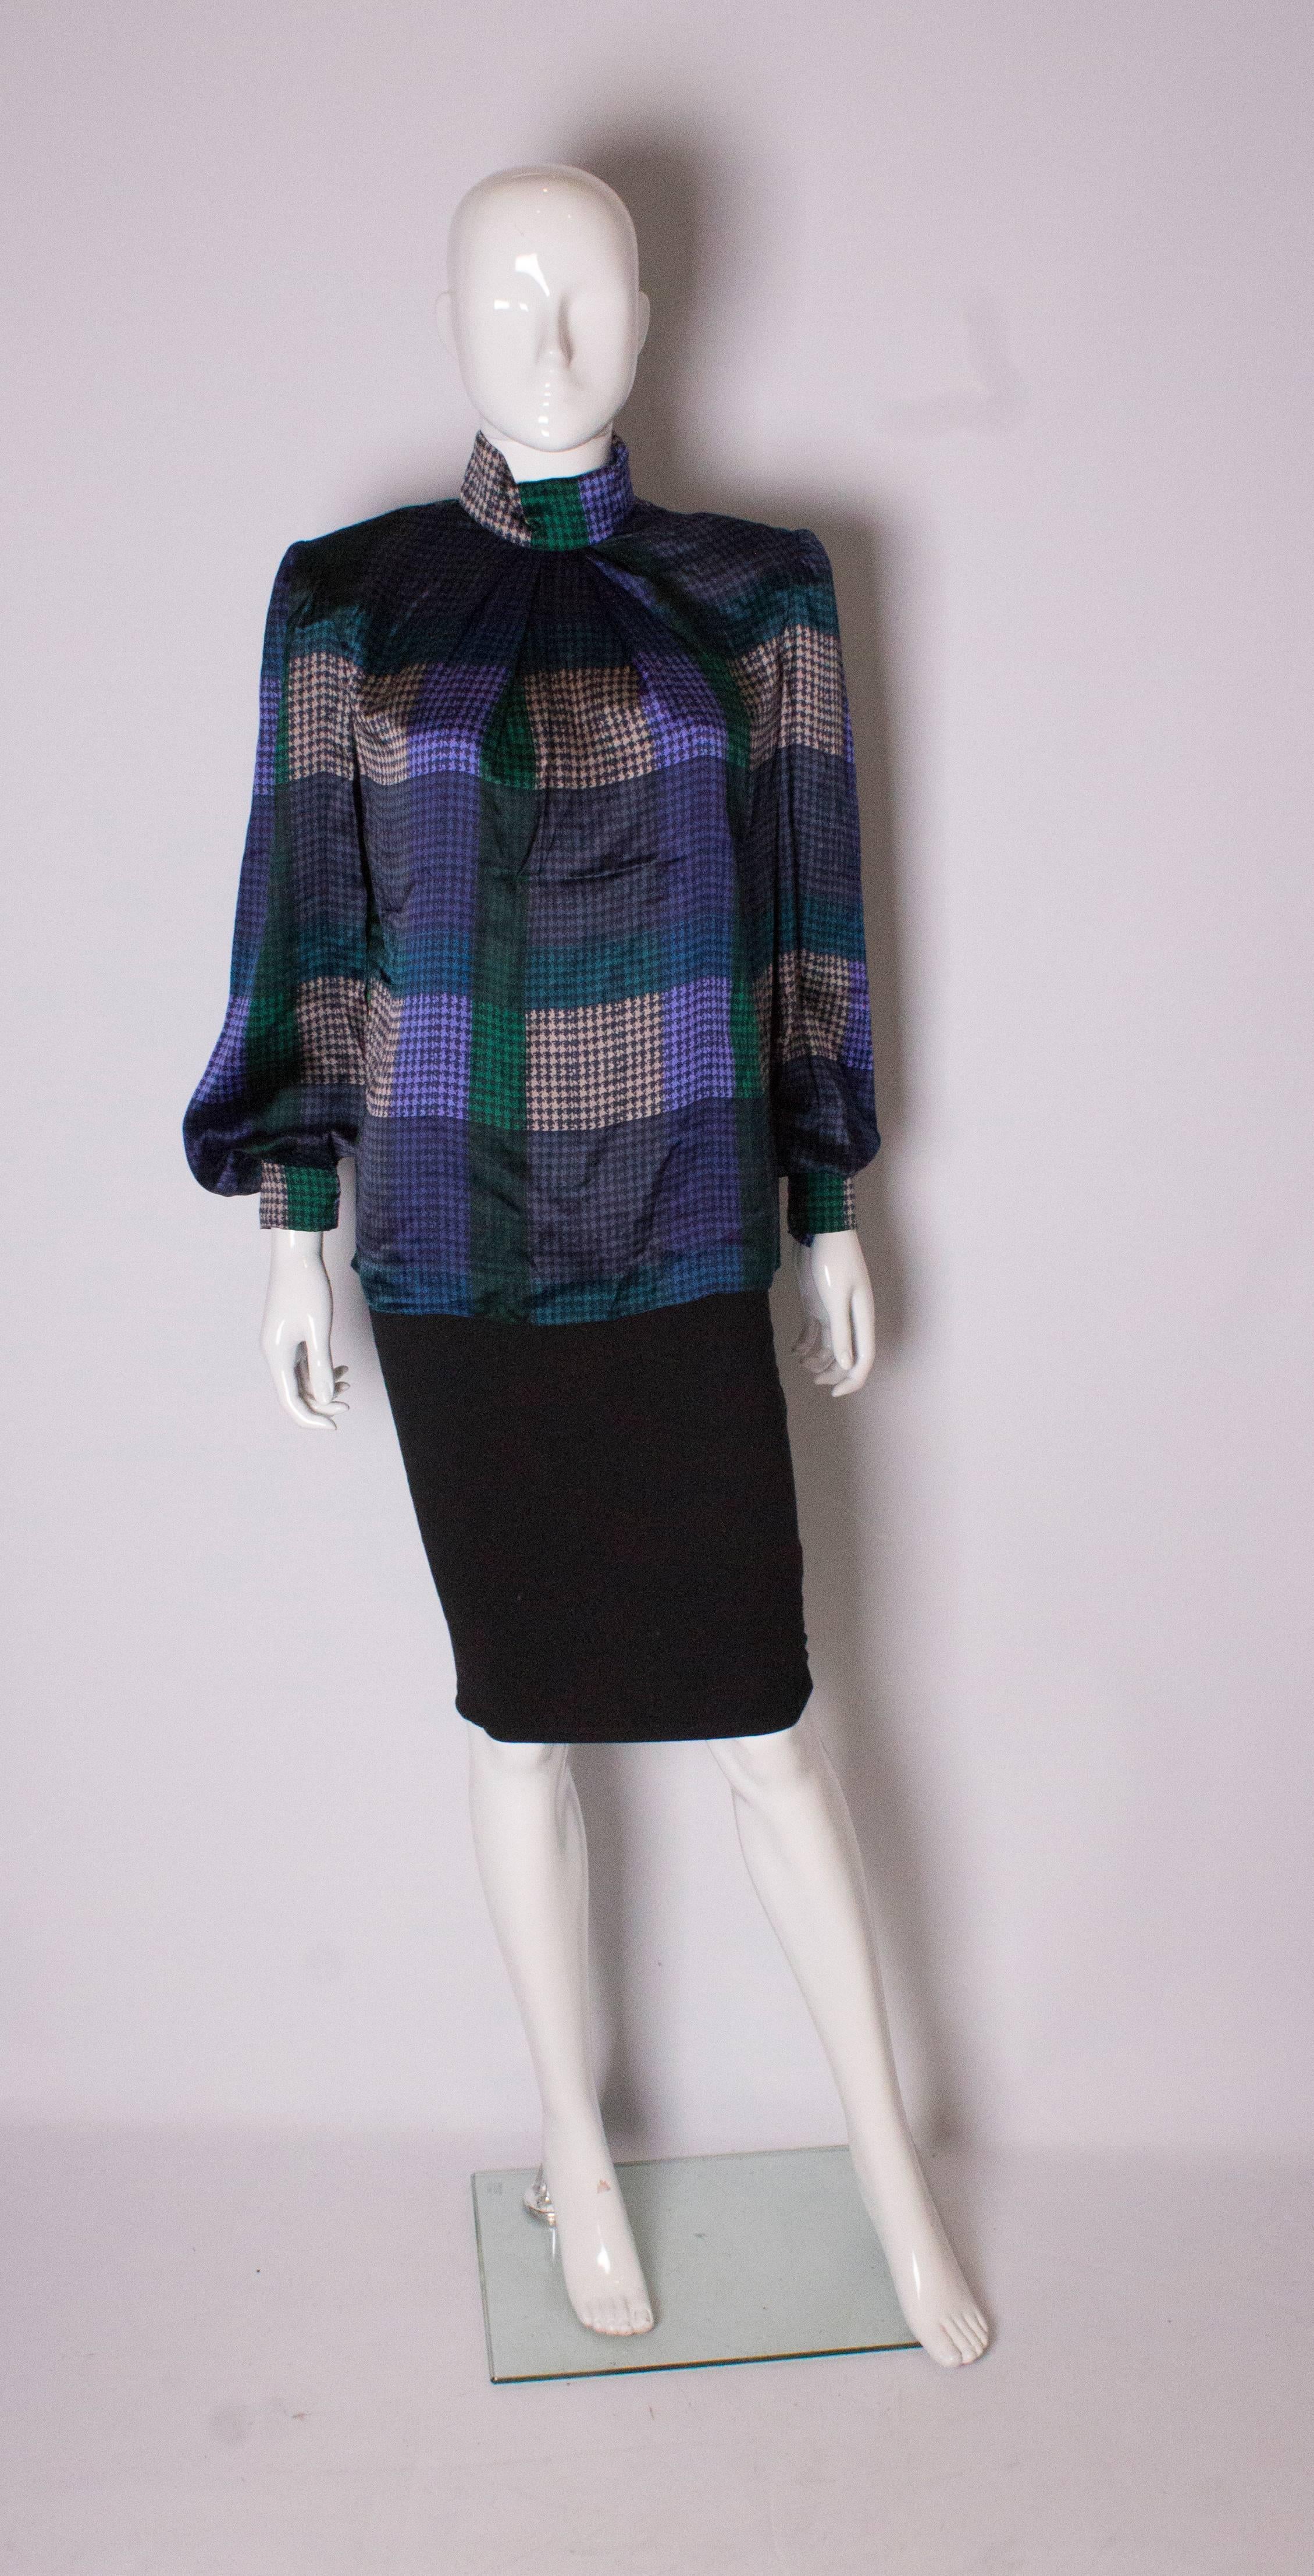 A chic silk blouse by Donald Campbell. In a hounds tooth print, in grey, green , purple and black. The blouse has a stand up collar, zip back and popper cuffs. 